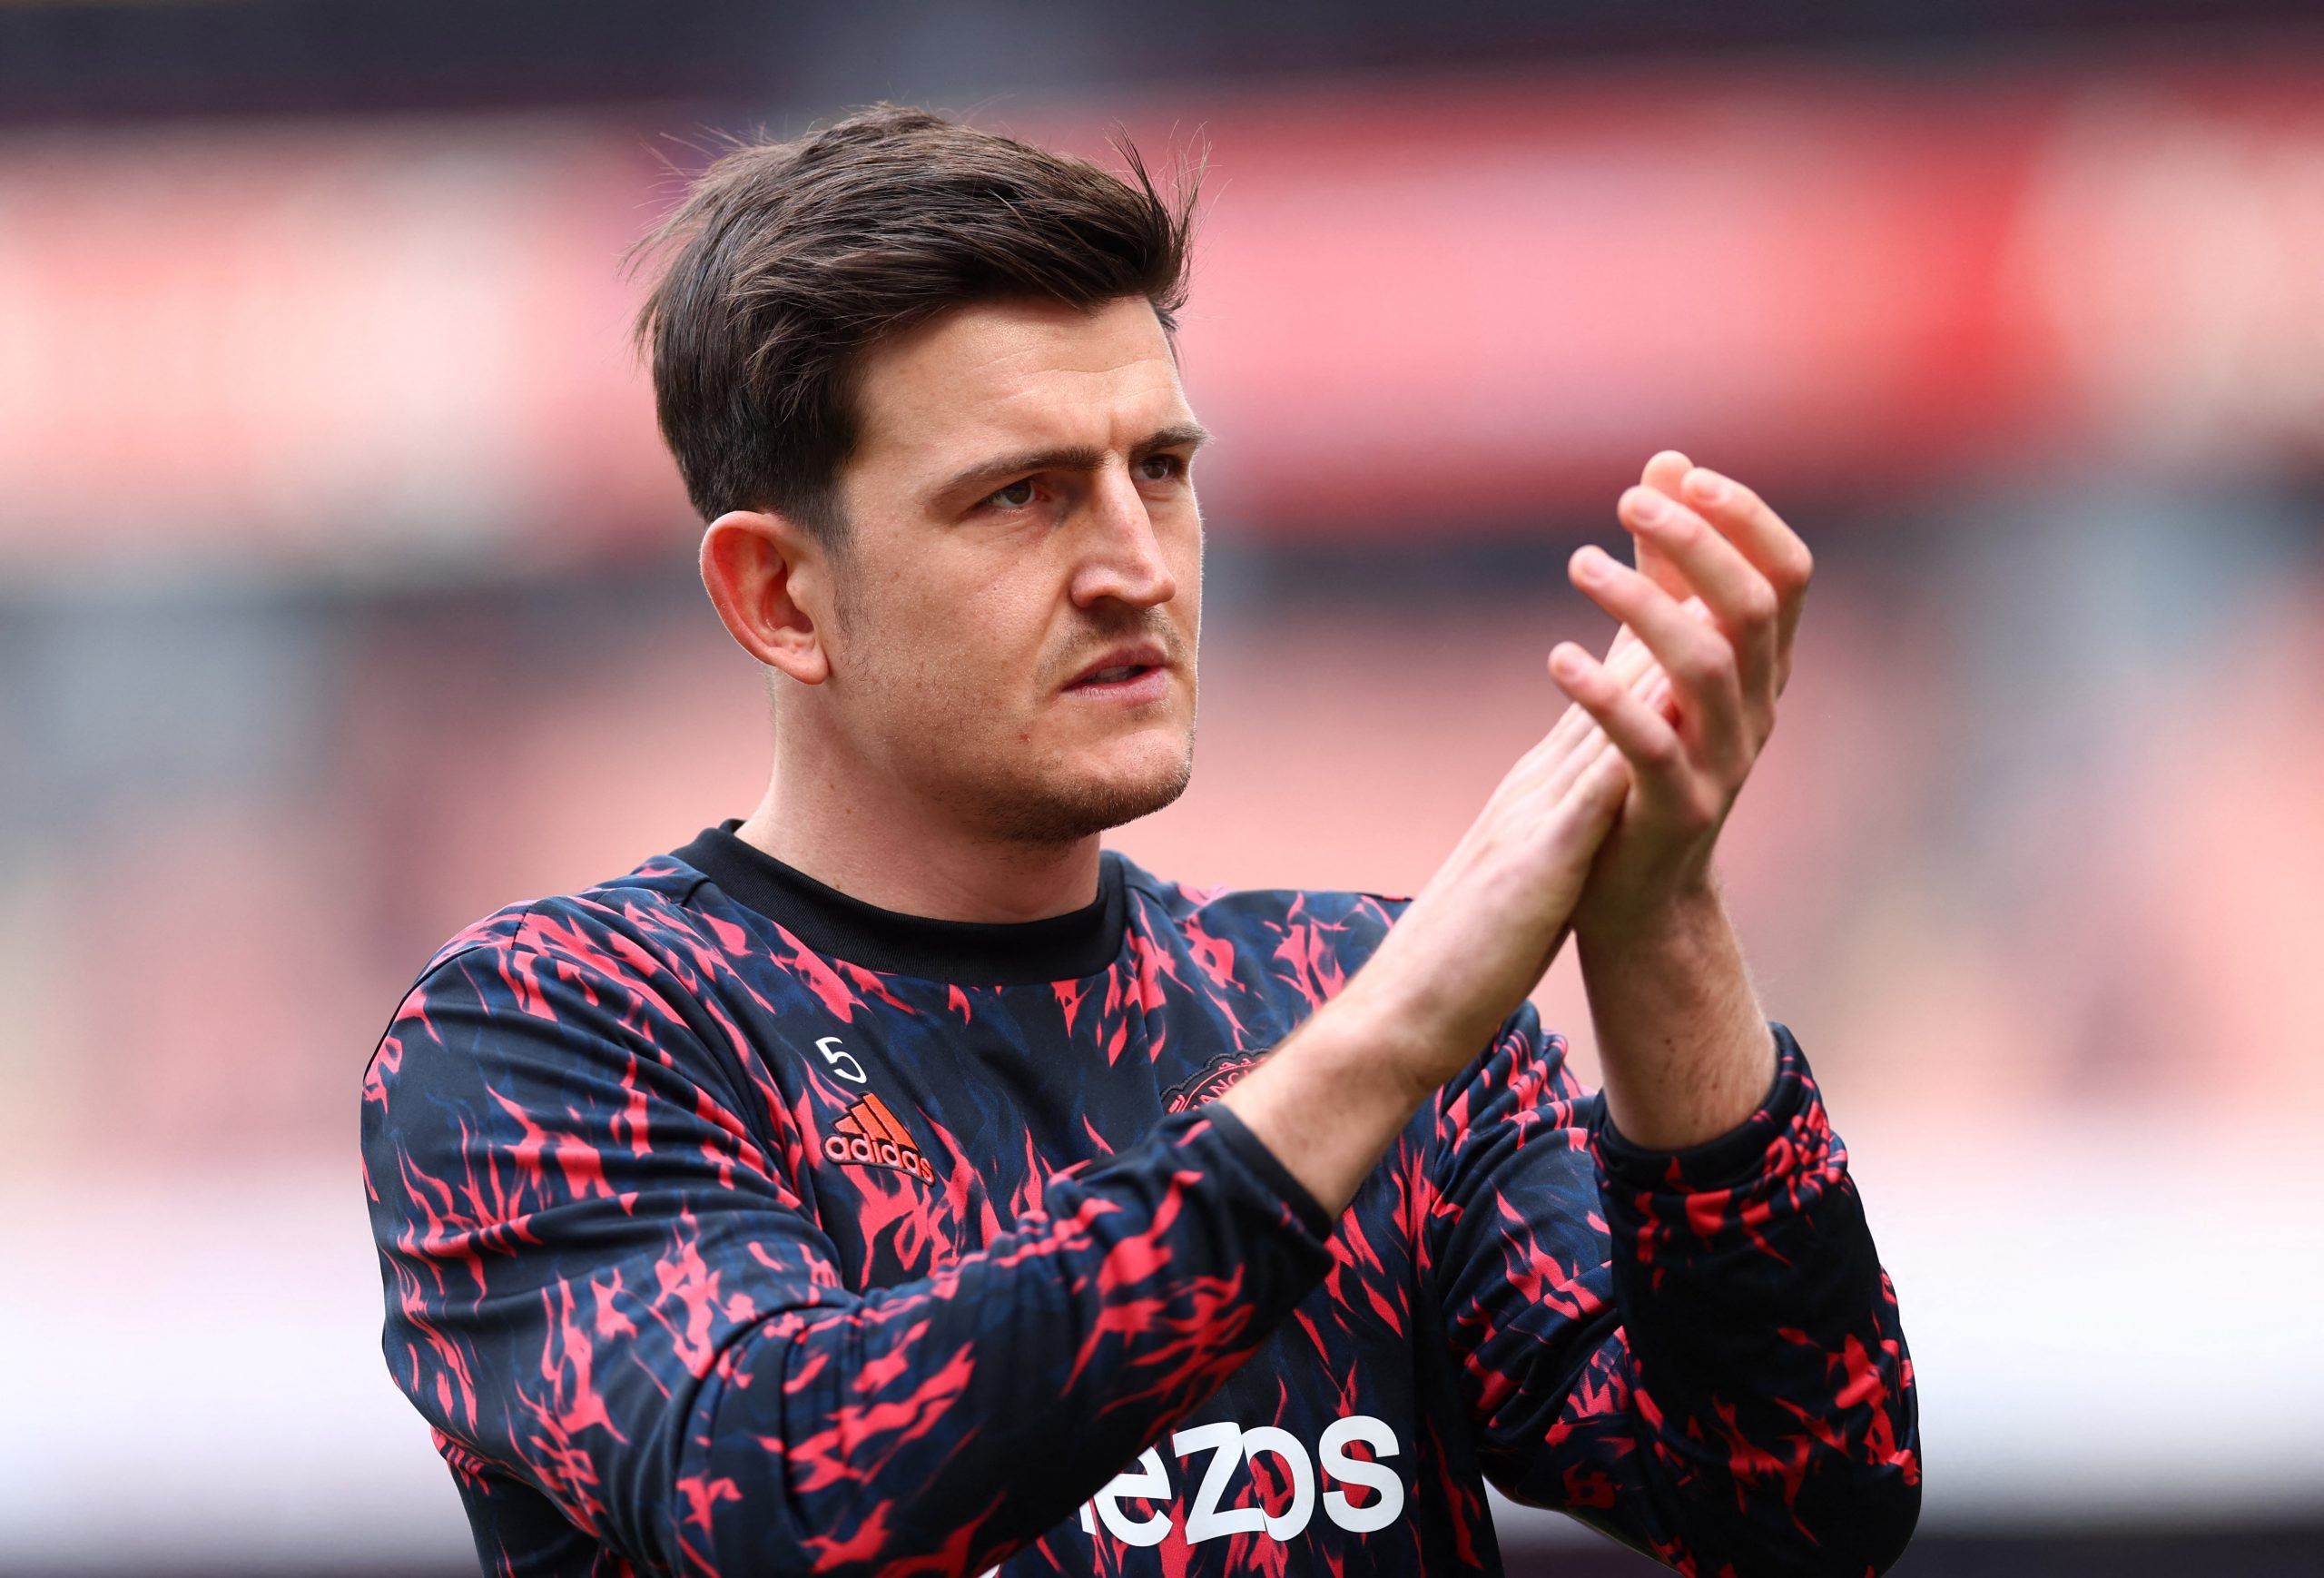 Premier League, Manchester United, MUFC, MUFC team news, MUFC injury news, Man United, Man United injury update, Old Trafford, Harry Maguire